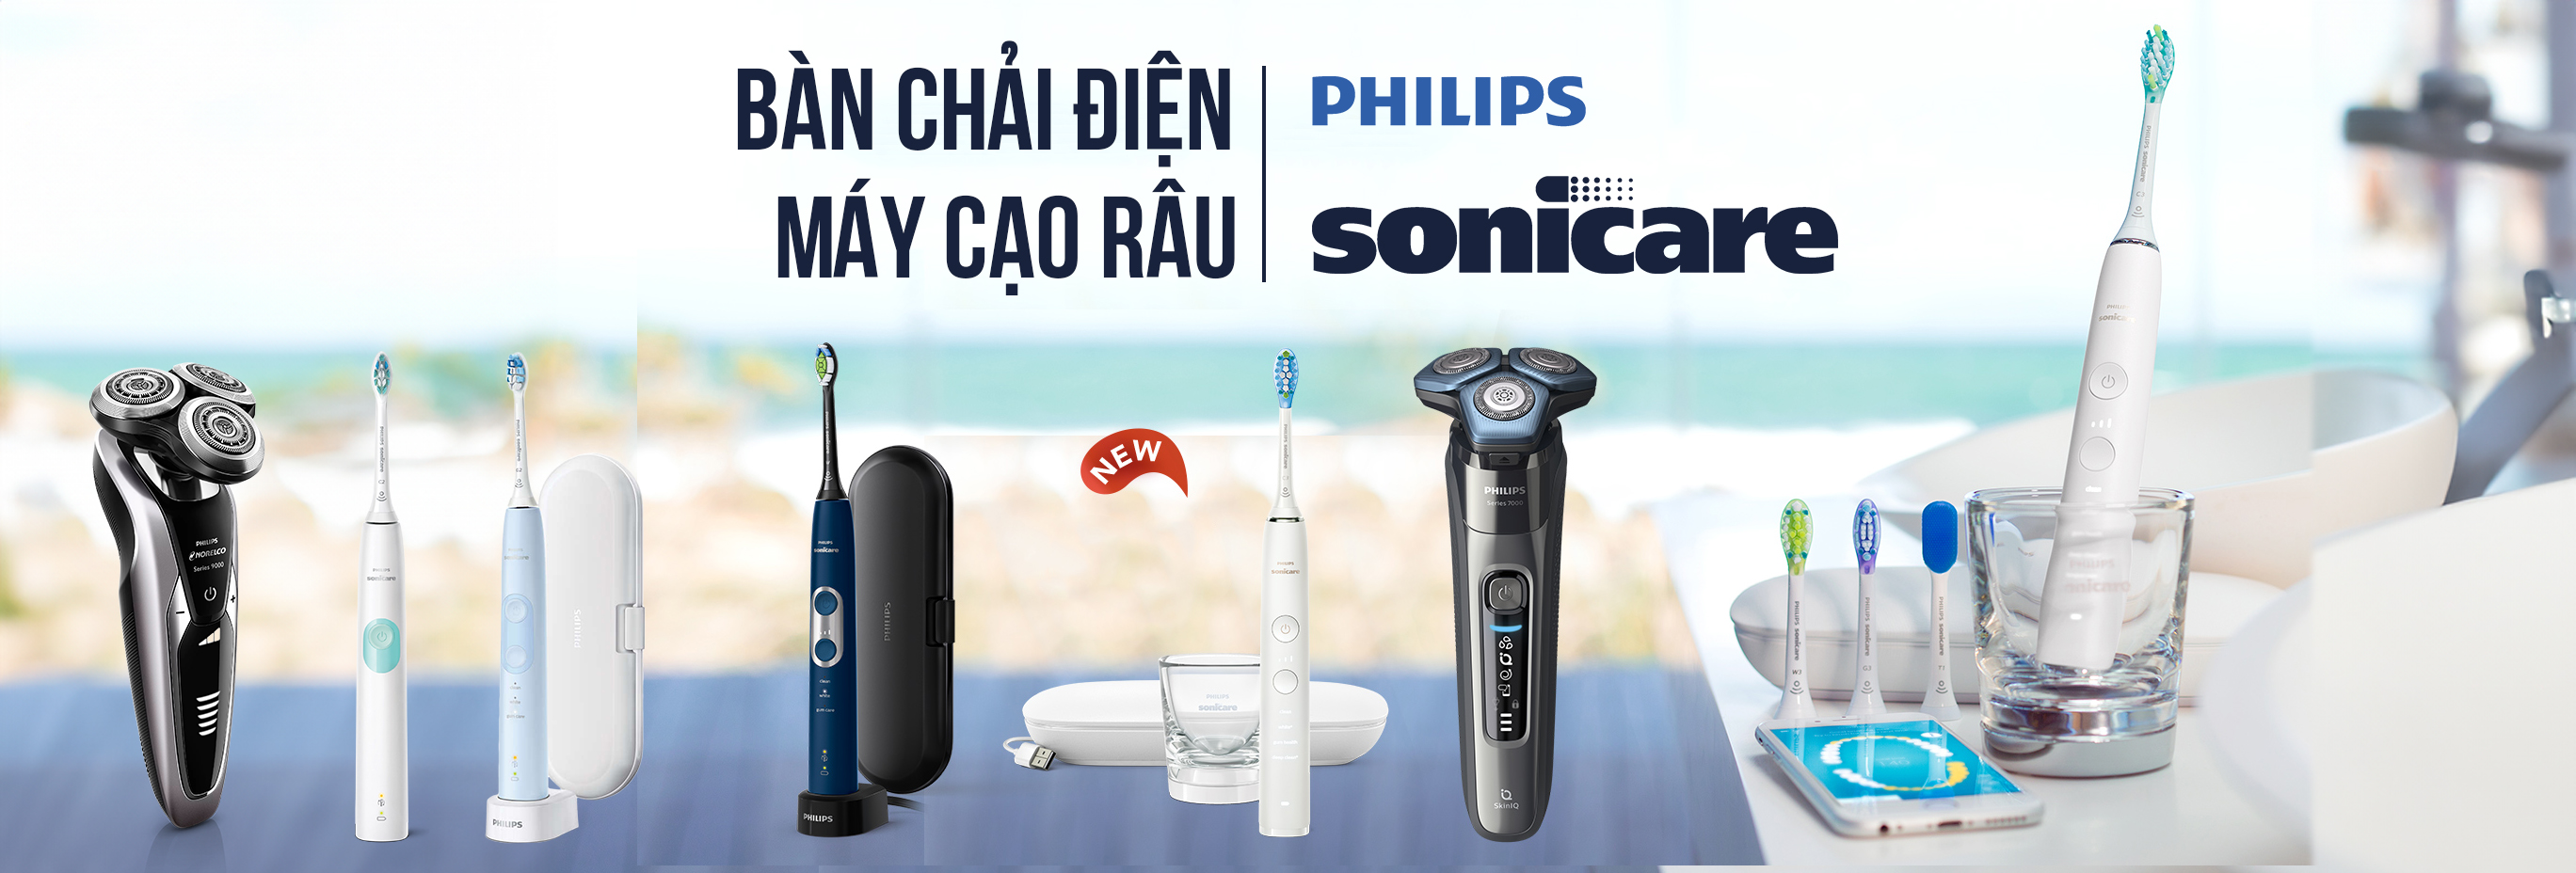 Ban chai dien Philips Sonicare chinh hang gia tot gia re